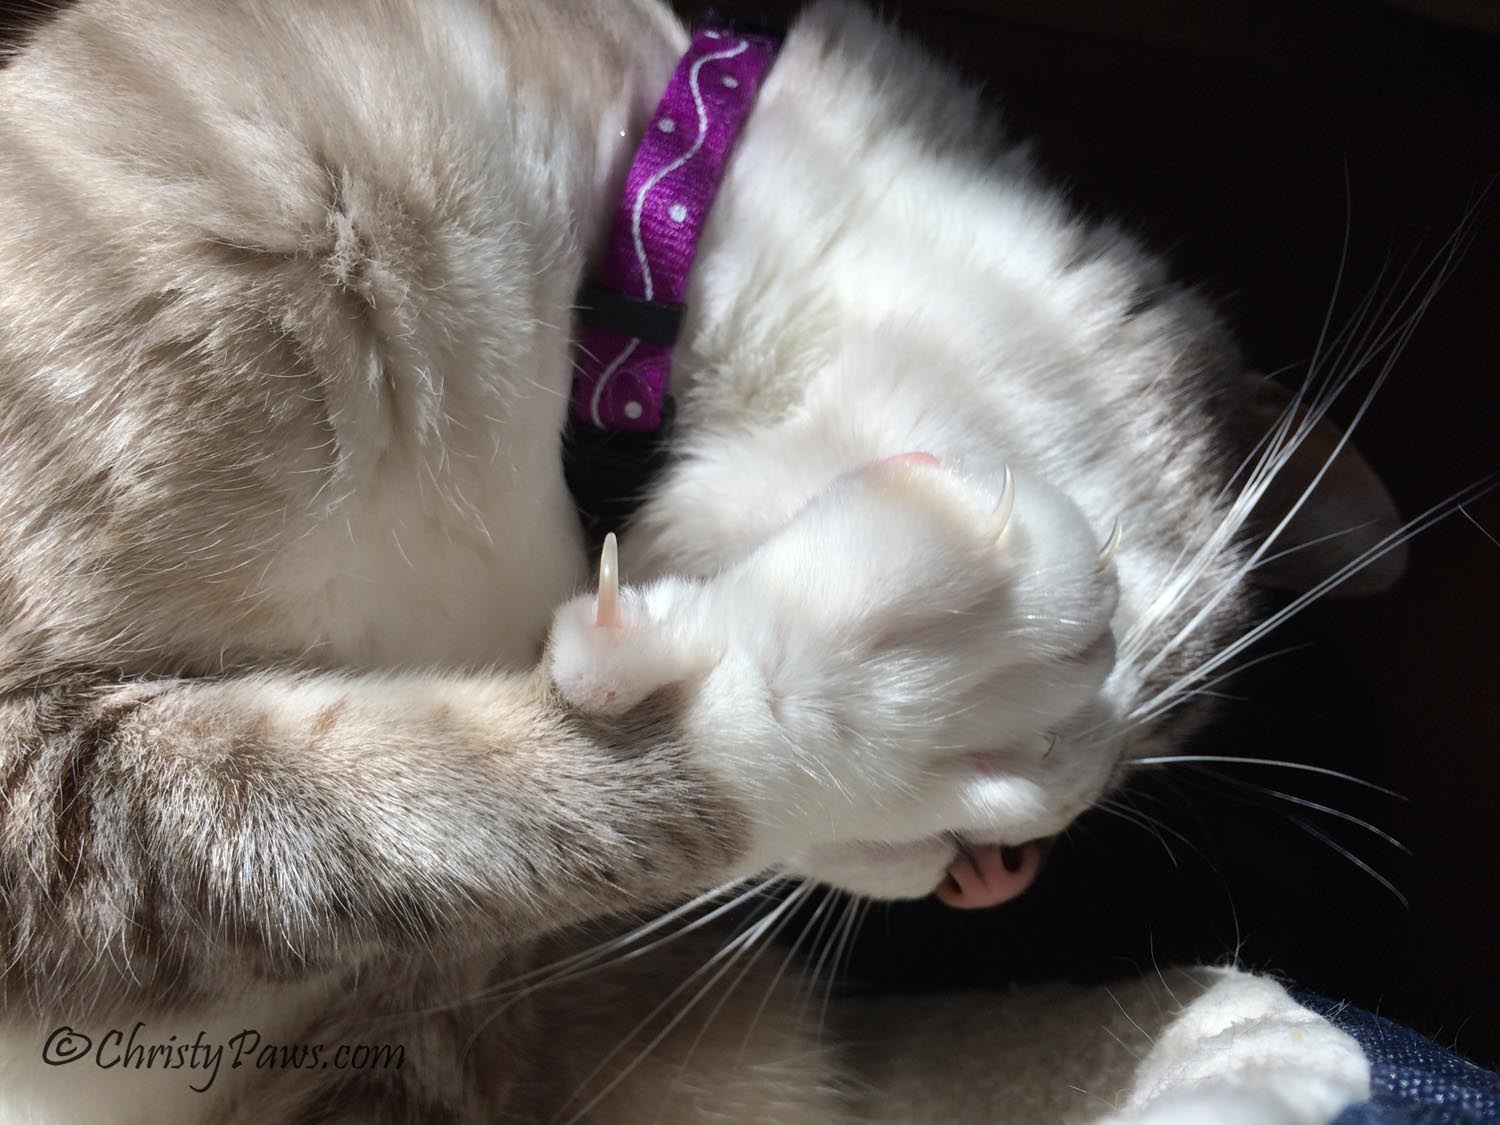 Wordless Wednesday: Must Have Clean Paws